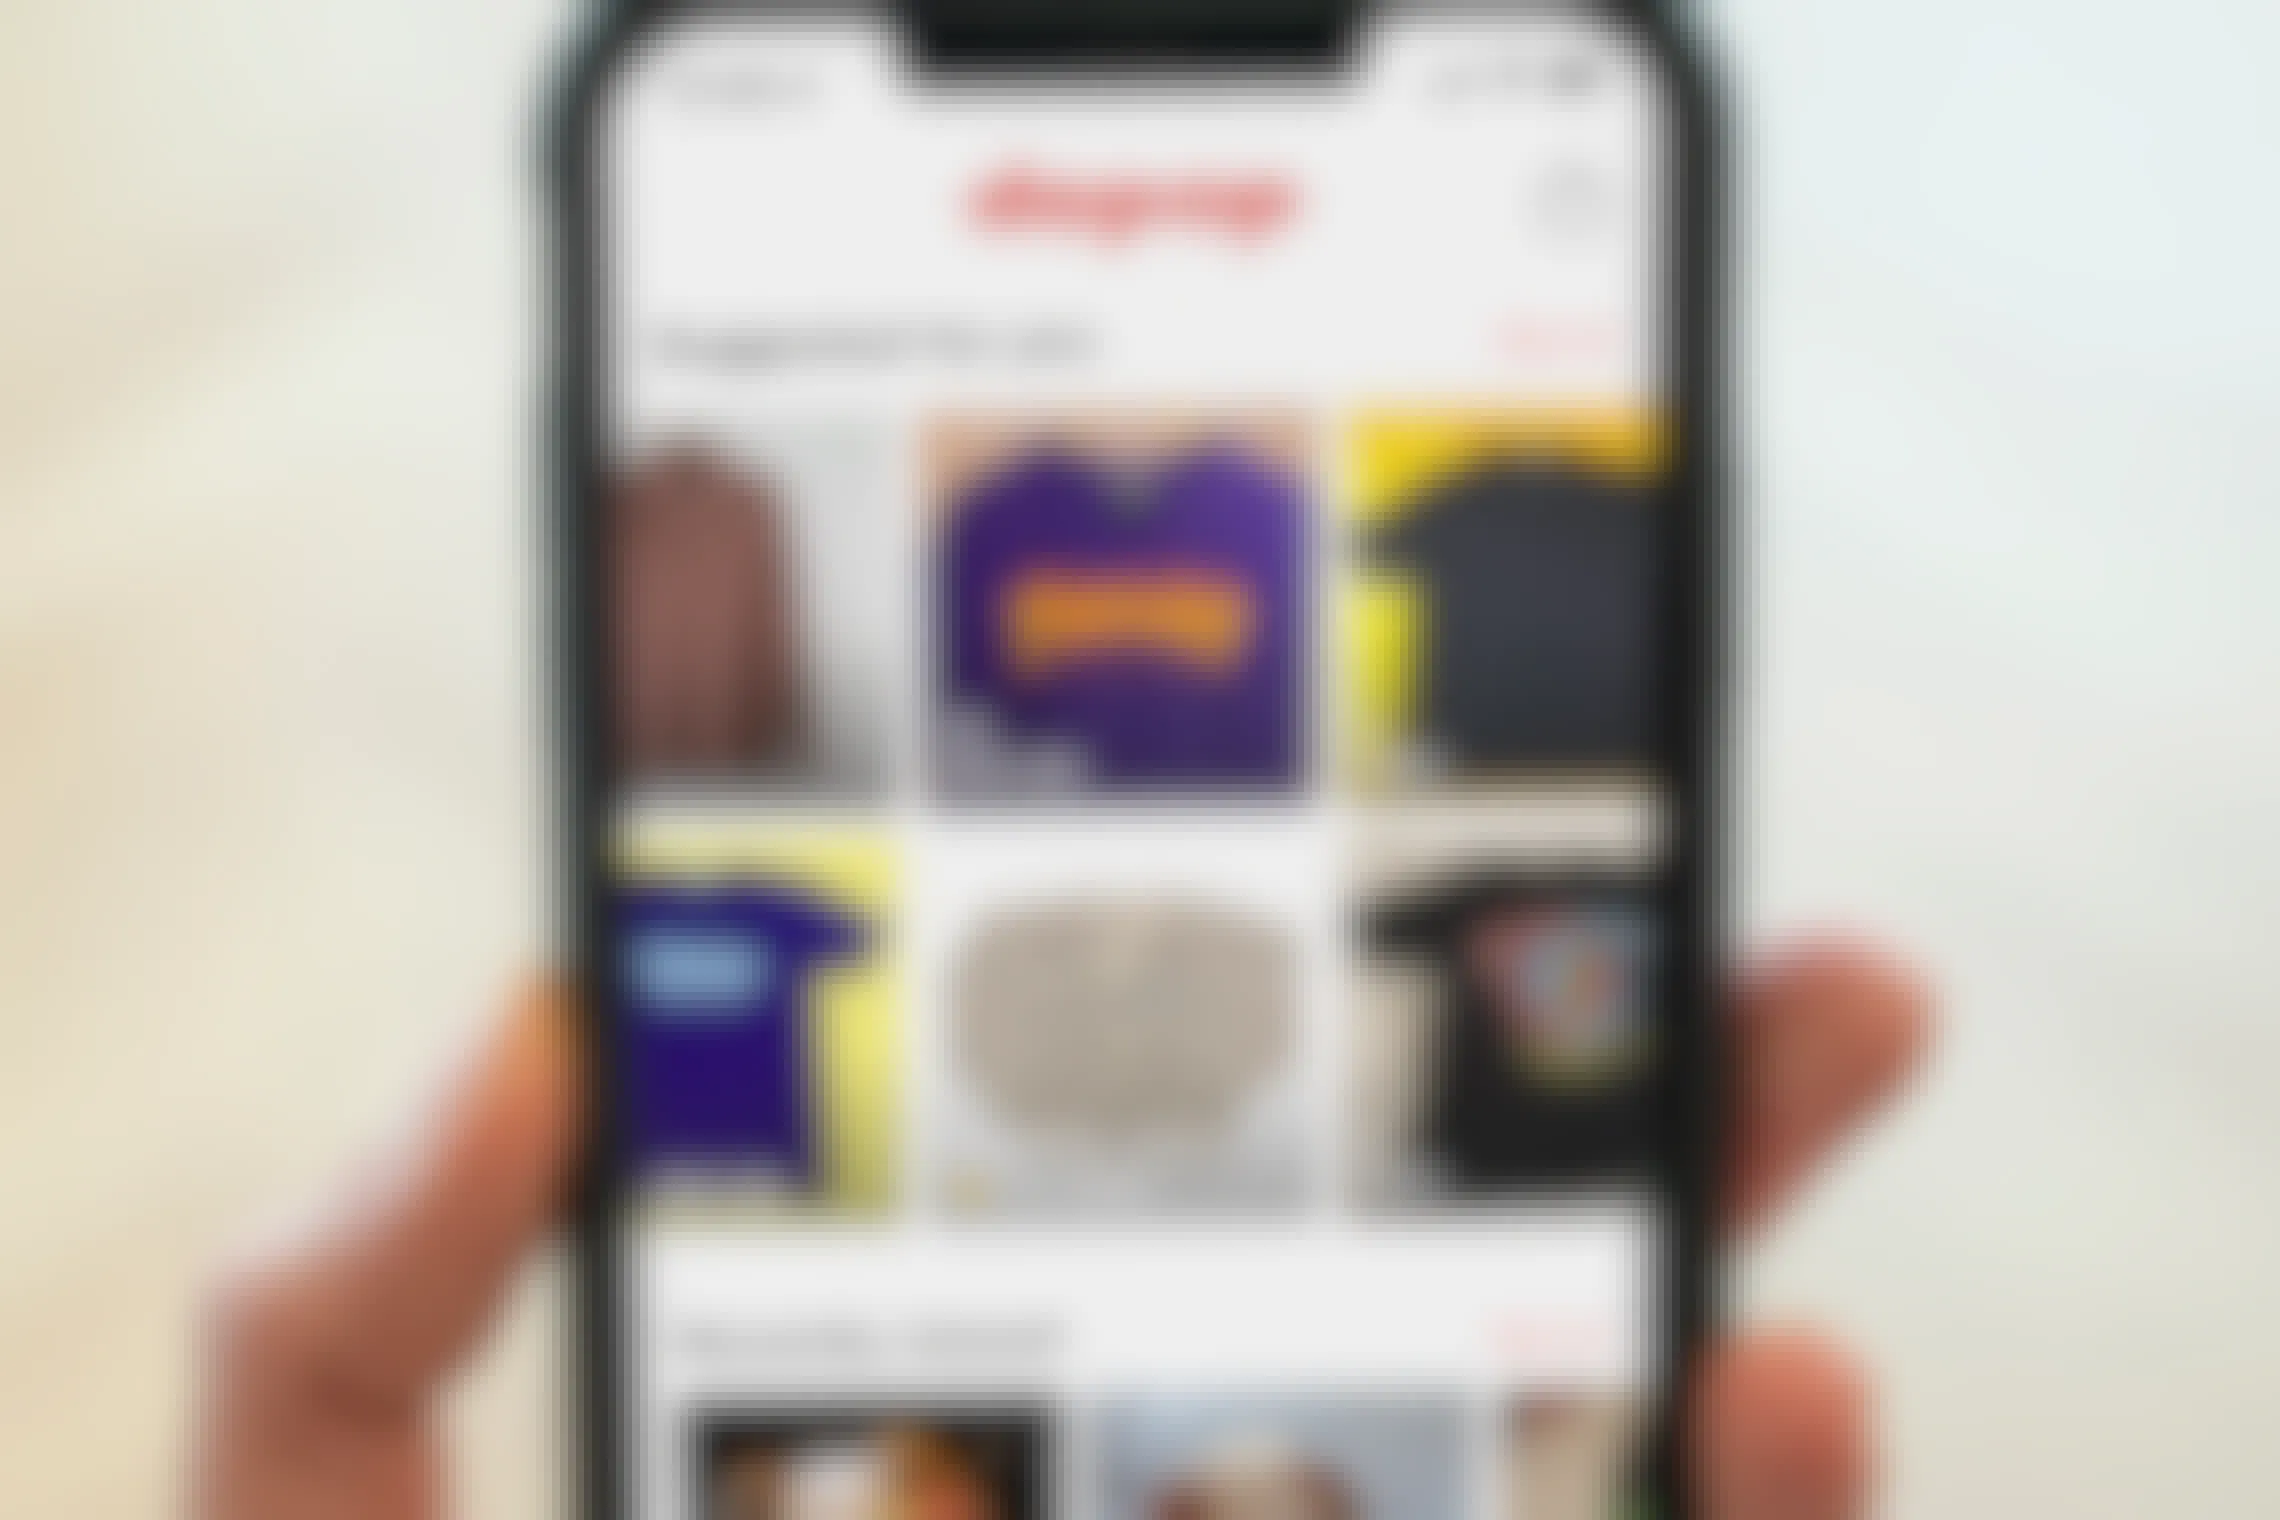 A hand holding up a cell phone displaying the Depop app.